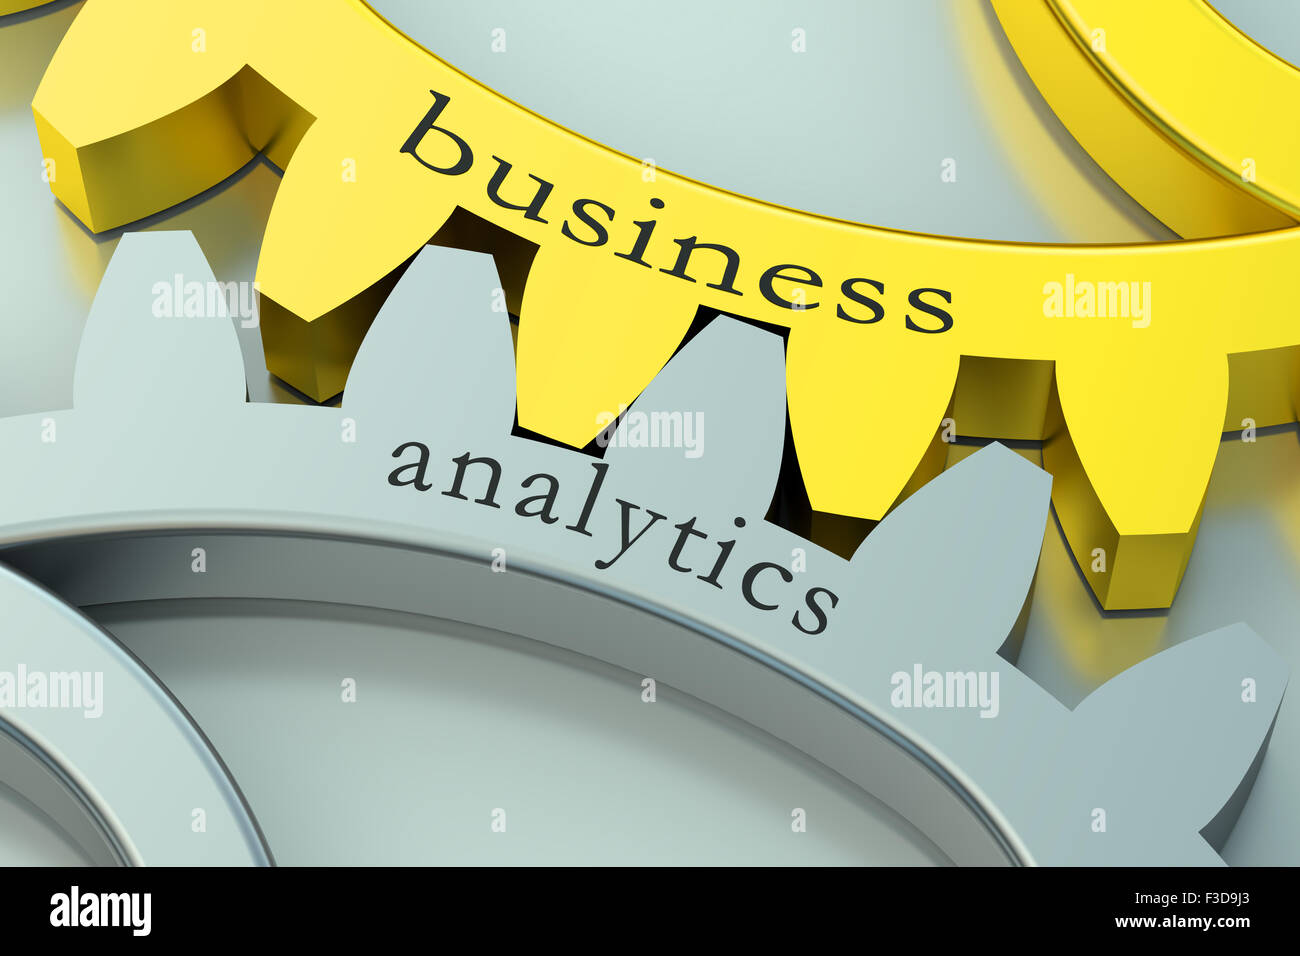 Business Analytics concept on the gearwheels Stock Photo